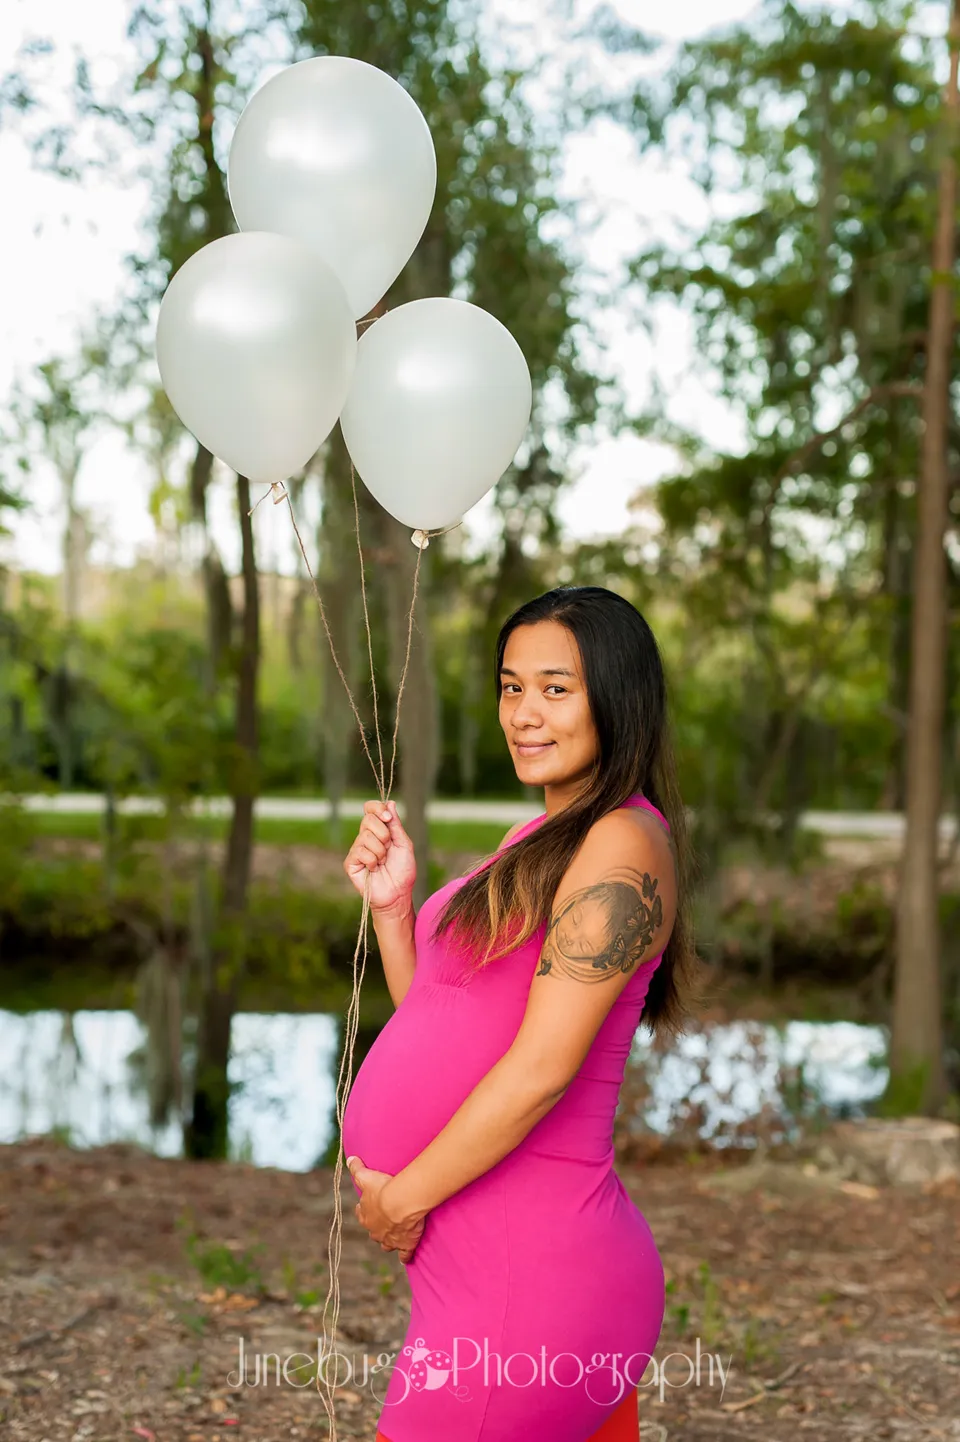 This Woman Did A Stunning Maternity Shoot After Going Through Six  Miscarriages